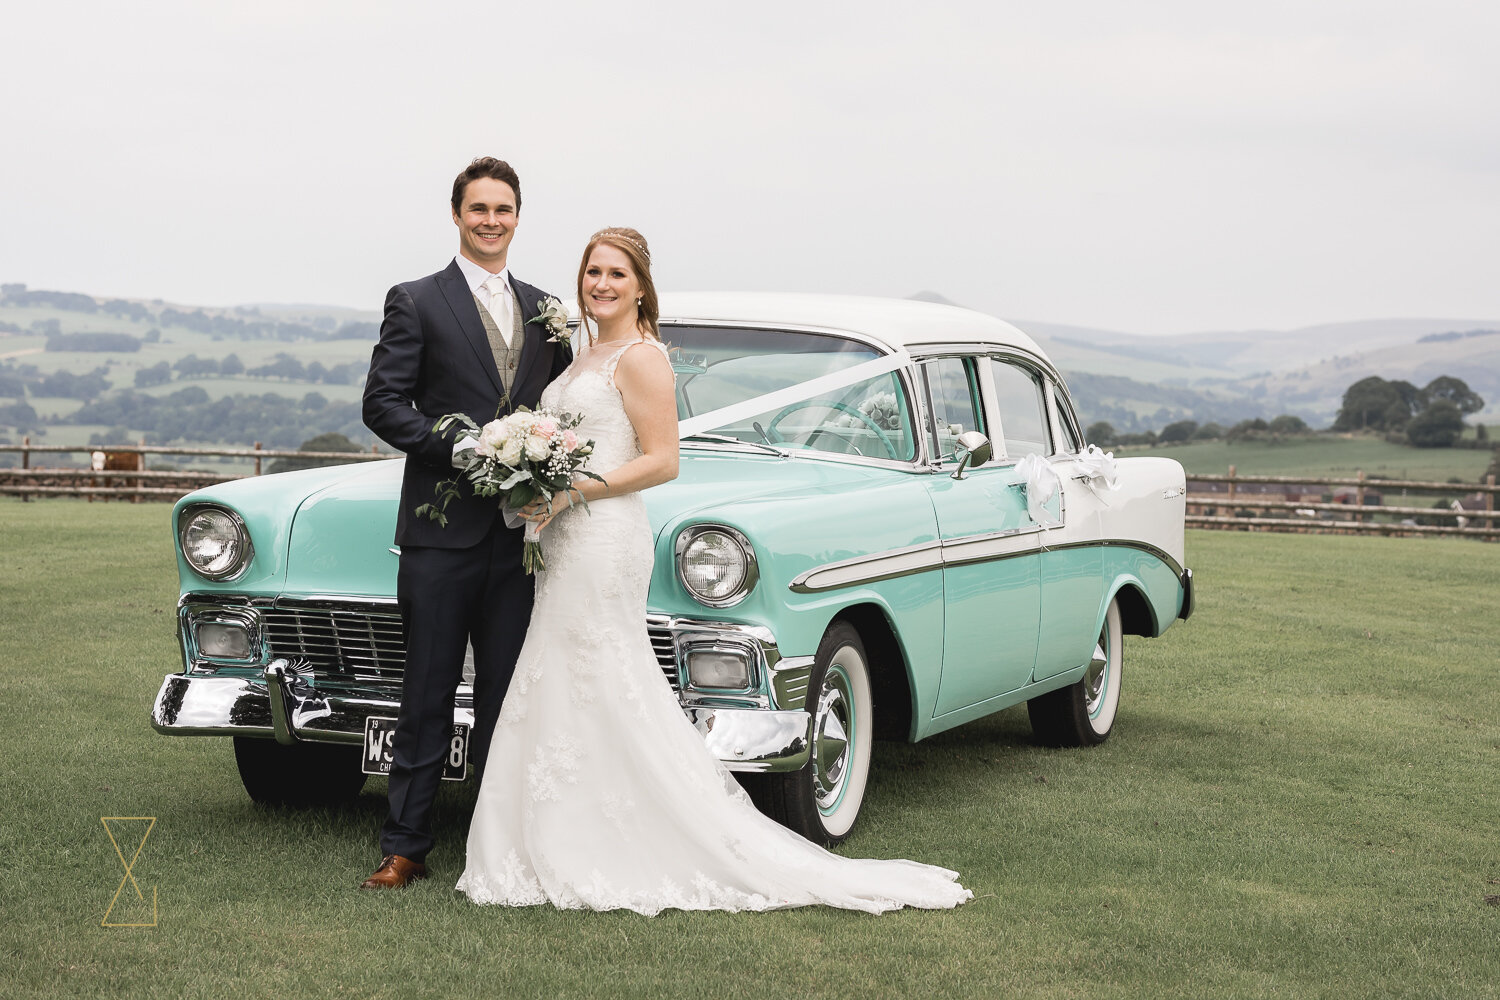 Bride-and-groom-in-front-of-vintage-Chevrolet-wedding-car